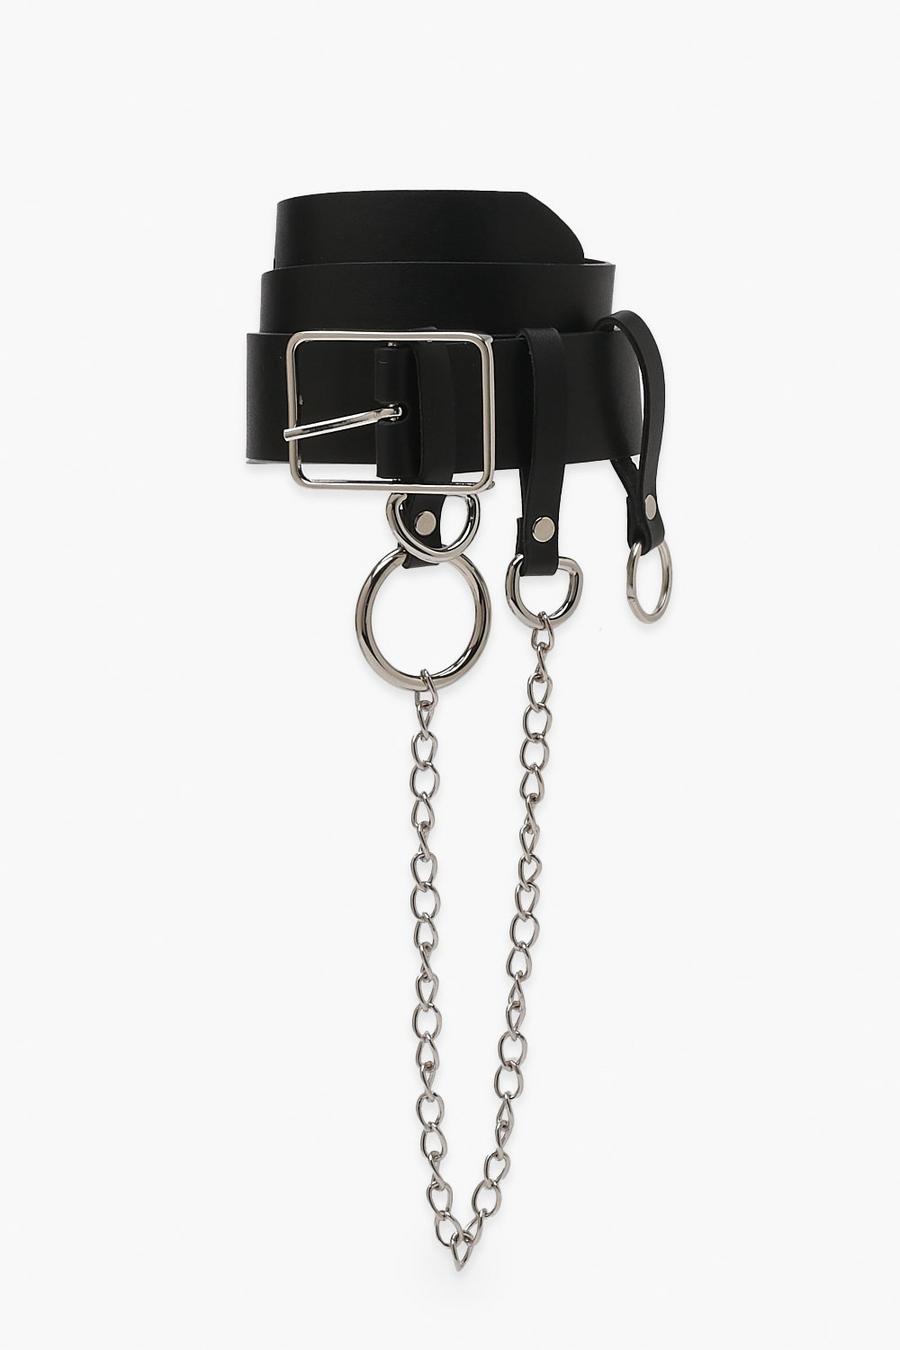 Black Square Buckle And Chain Waist Belt